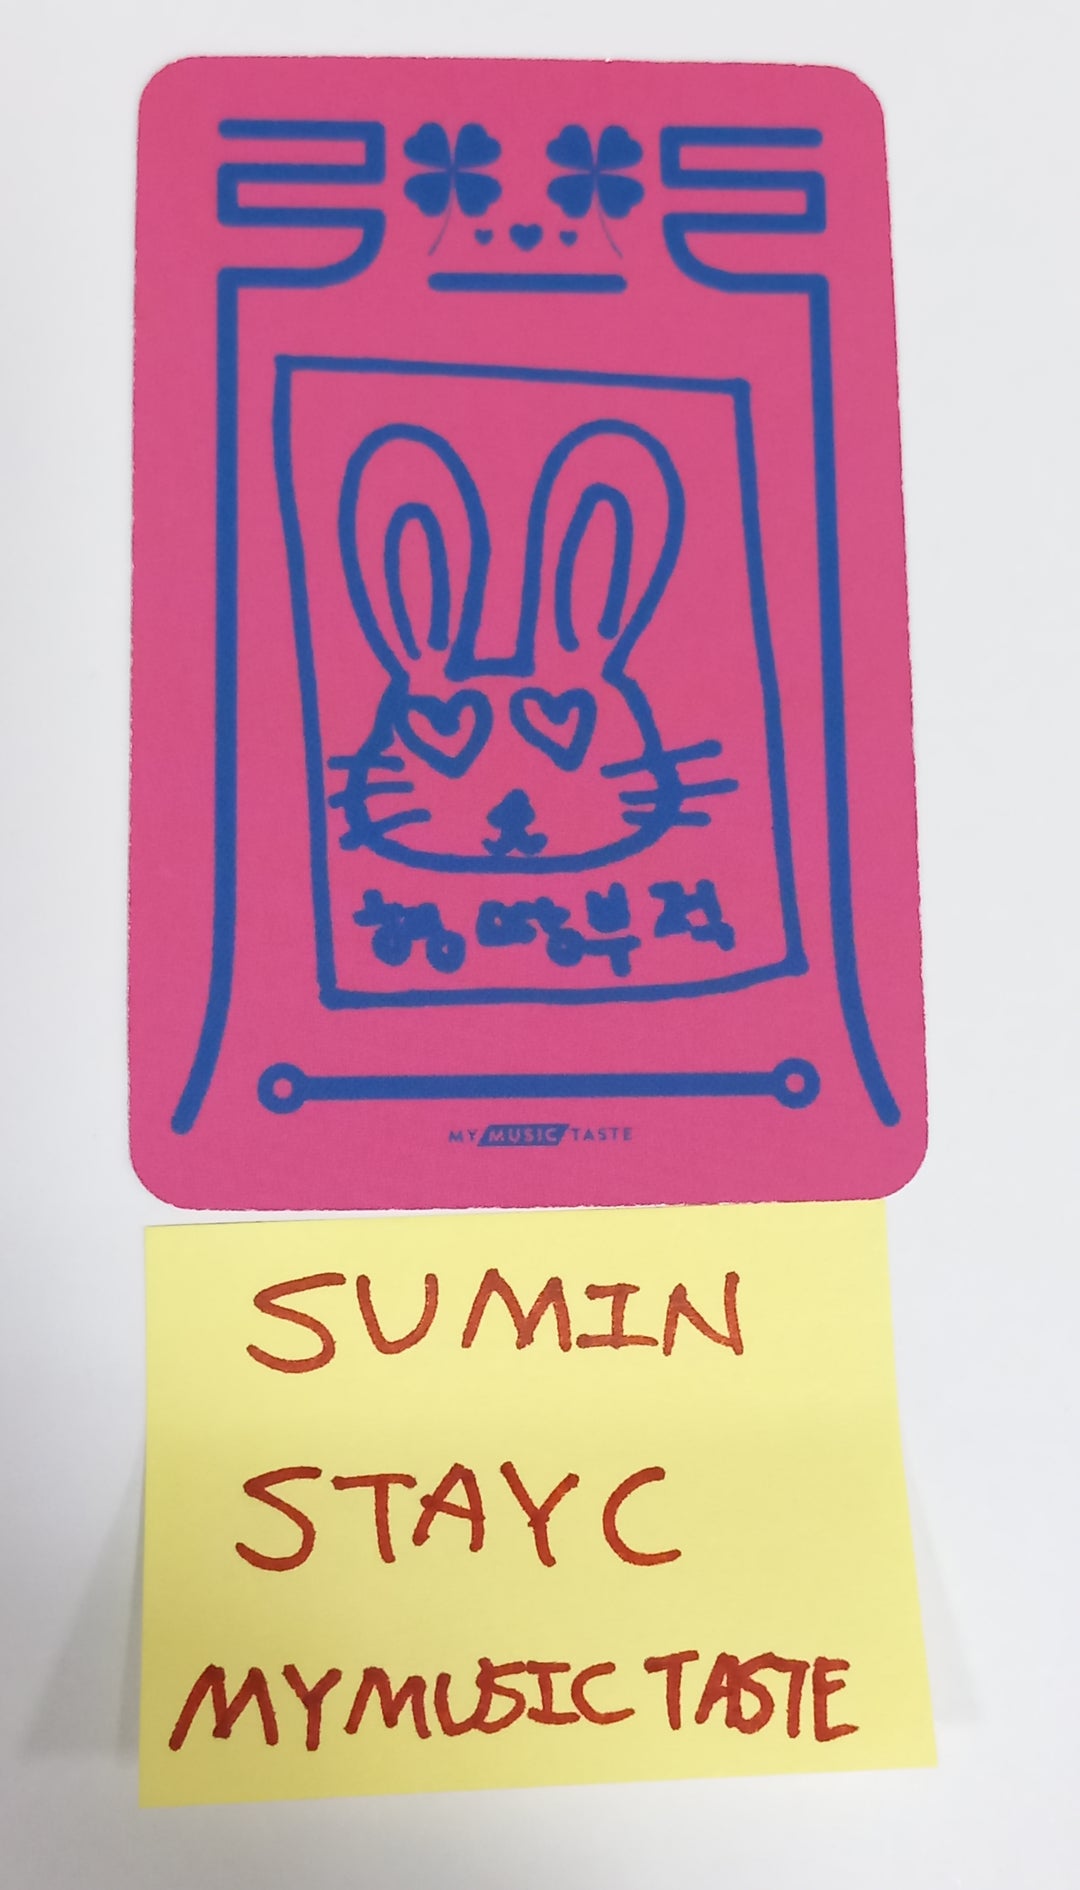 Sumin (Of STAYC) "TEENFRESH" - Hand Autographed(Signed) Photocard[23.09.21]